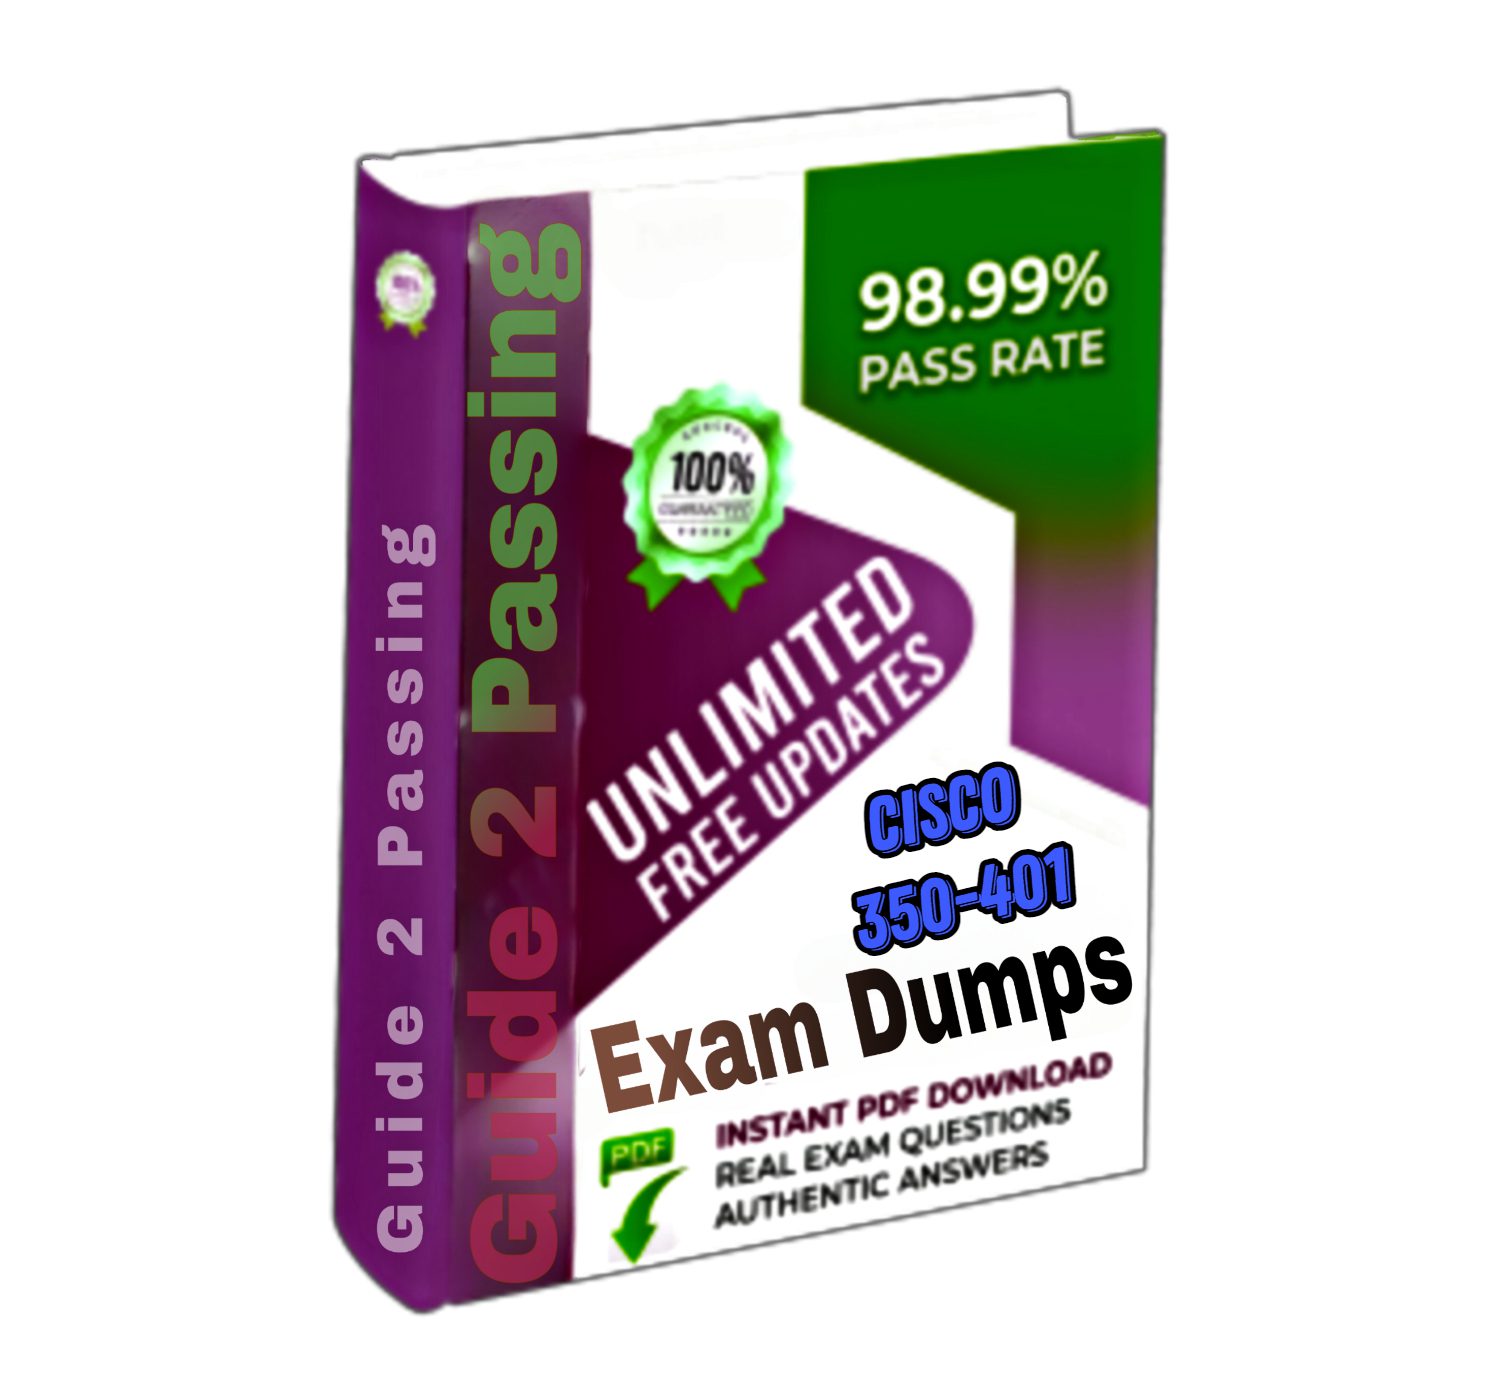 Pass Your Cisco 200-901 Exam Dumps From Guide 2 Passing